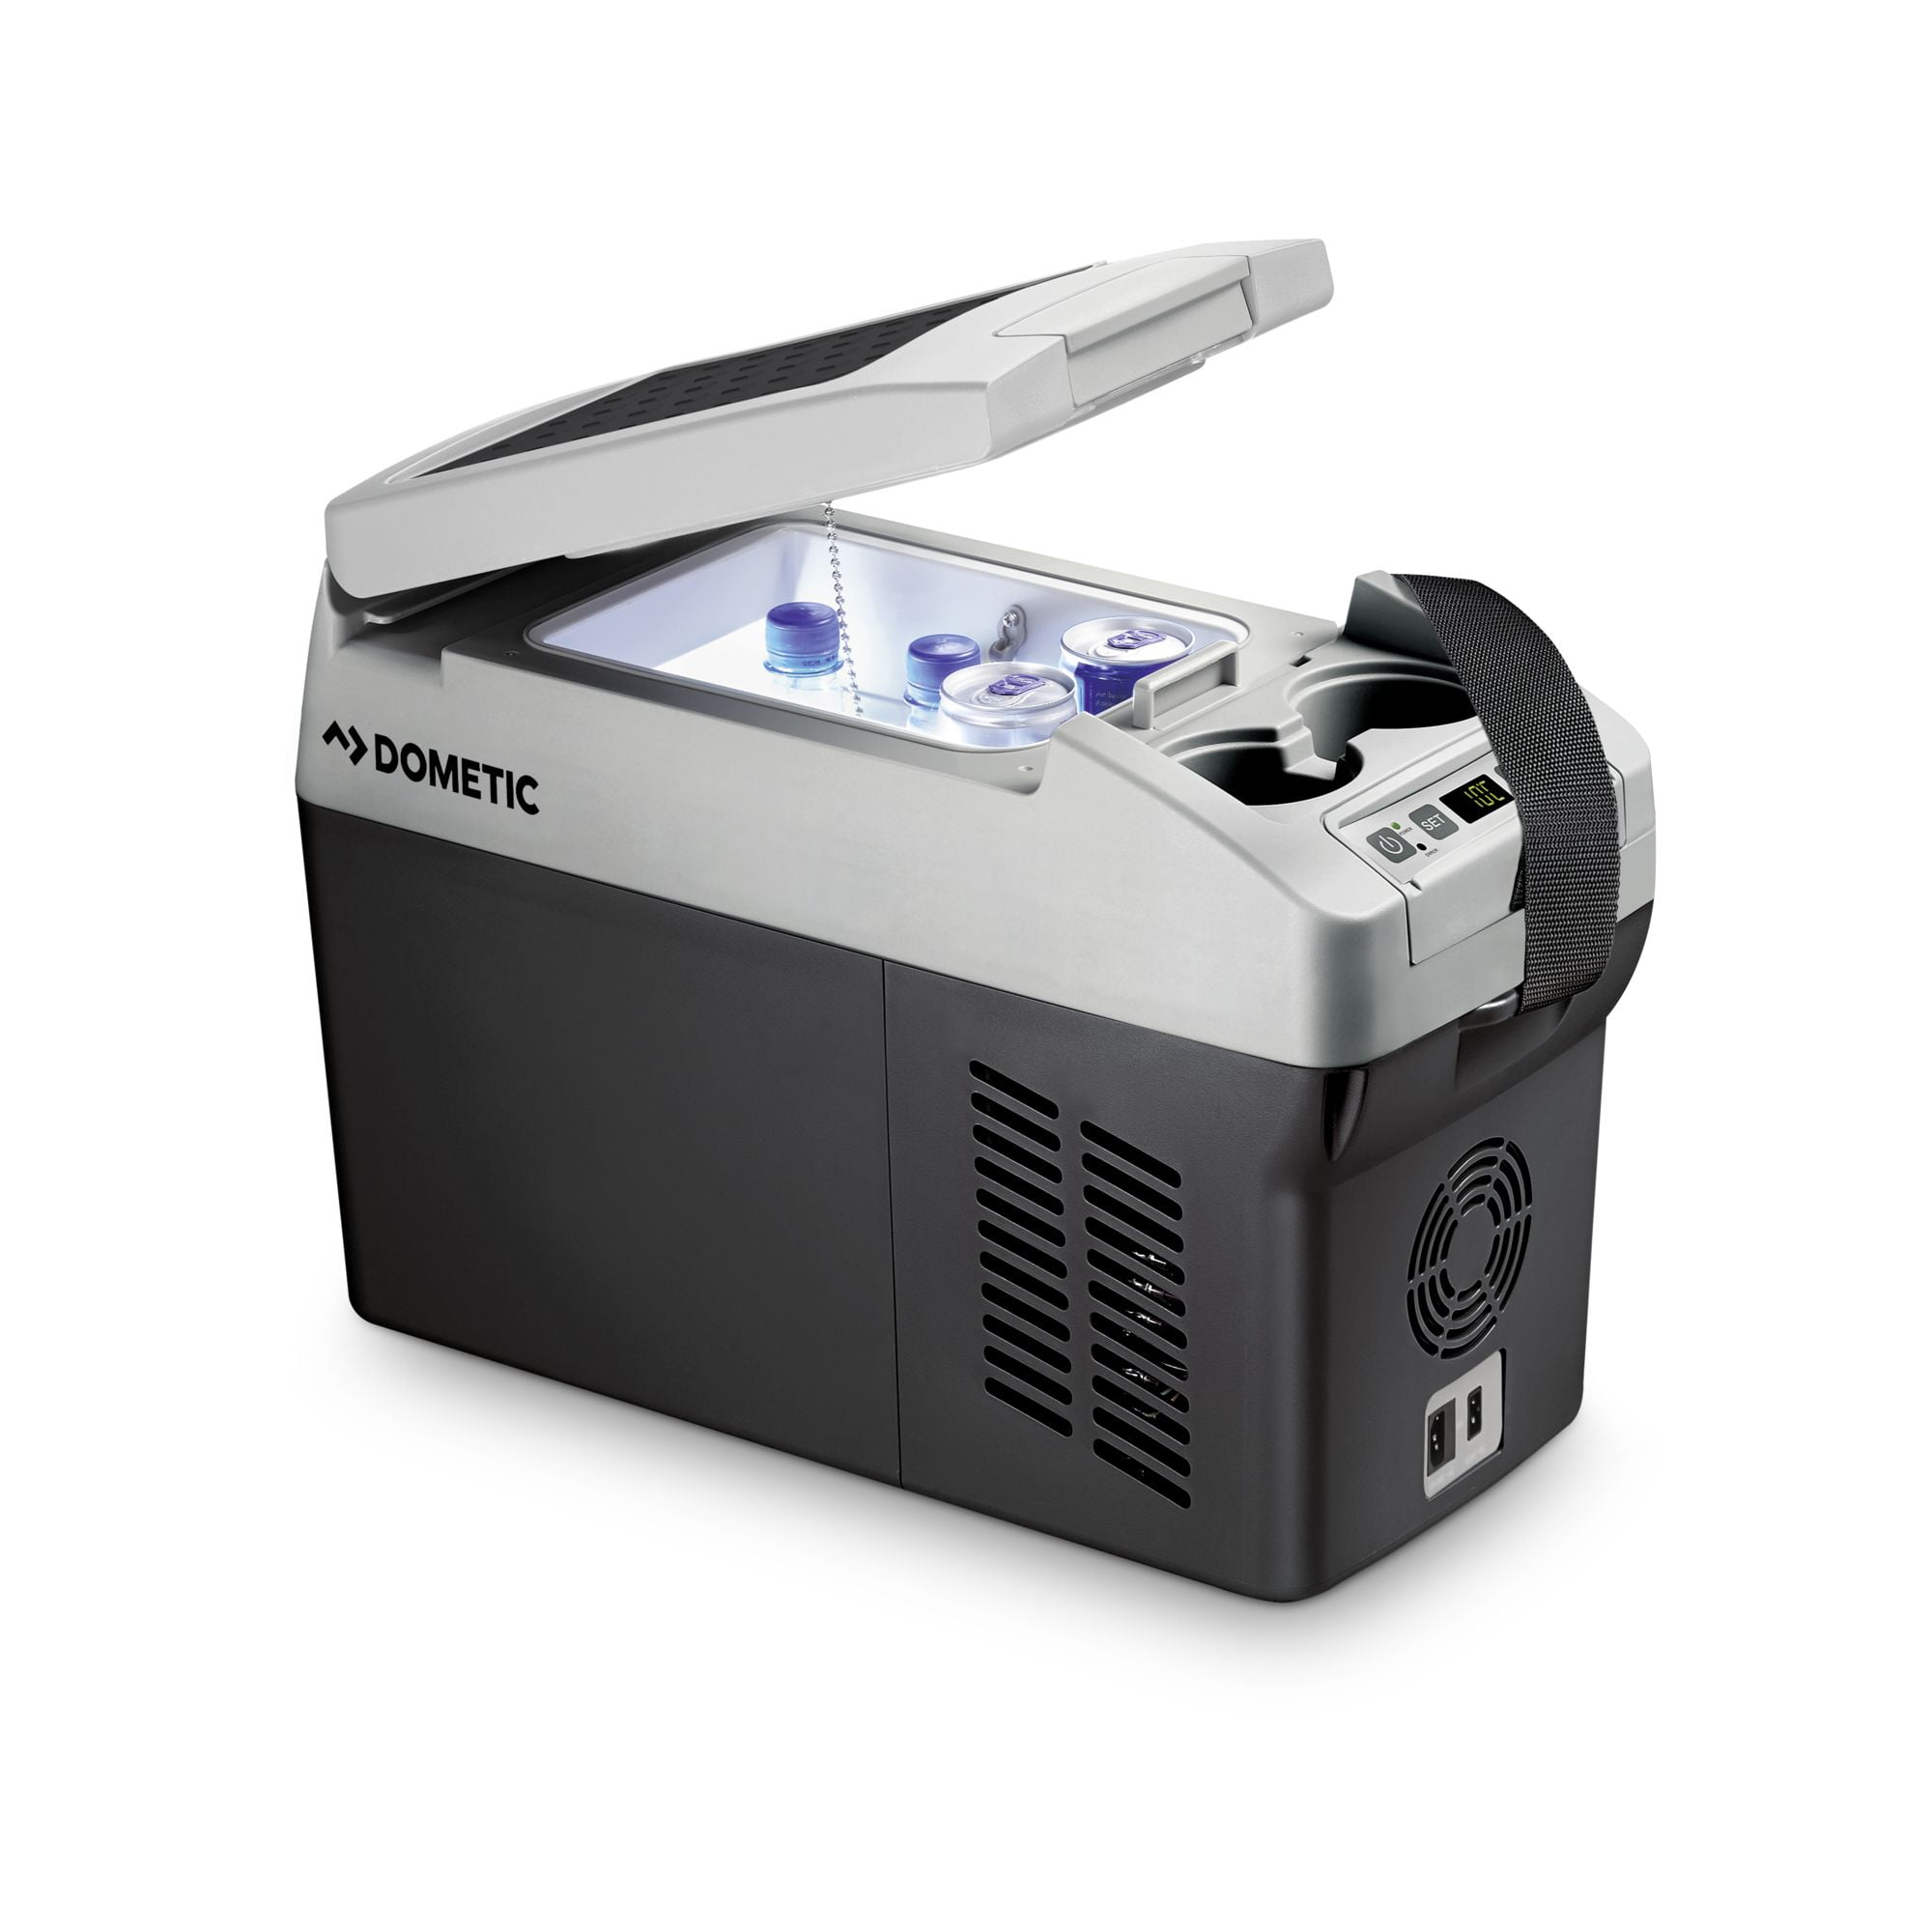 Marked Remission Outflow Dometic CDF11 12V Electric Powered Cooler, Fridge Freezer - Walmart.com